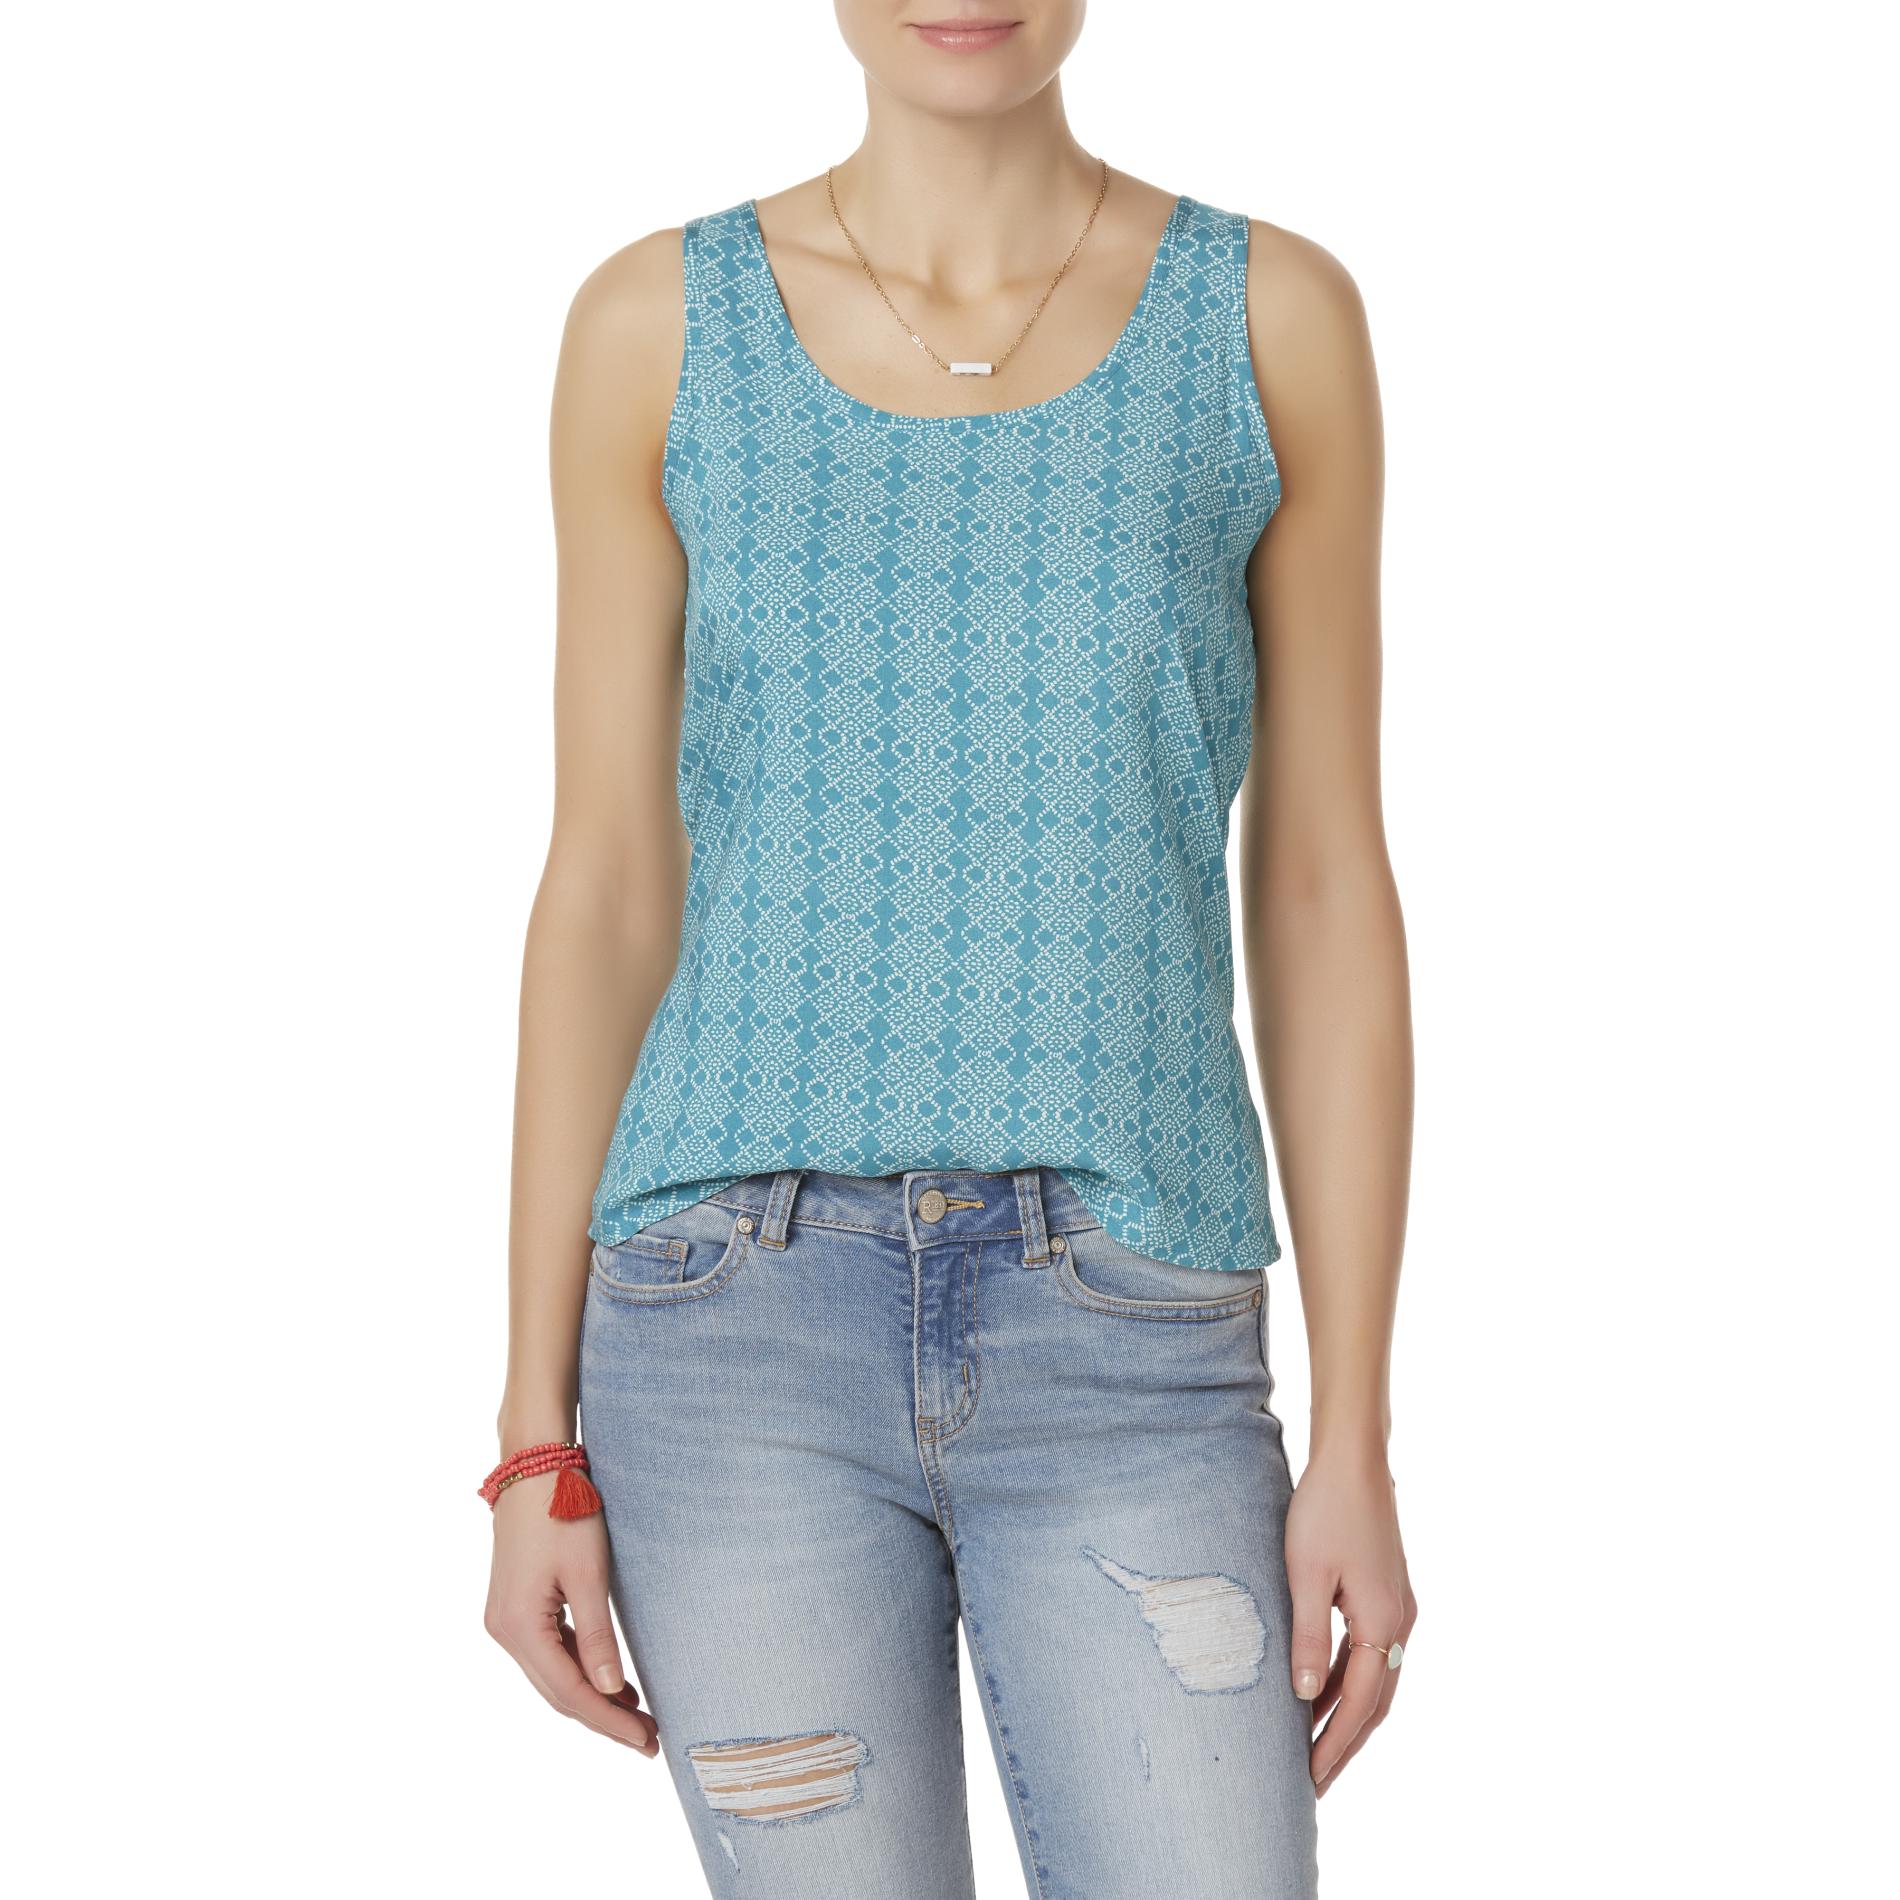 Simply Styled Women's Tank Top - Dots